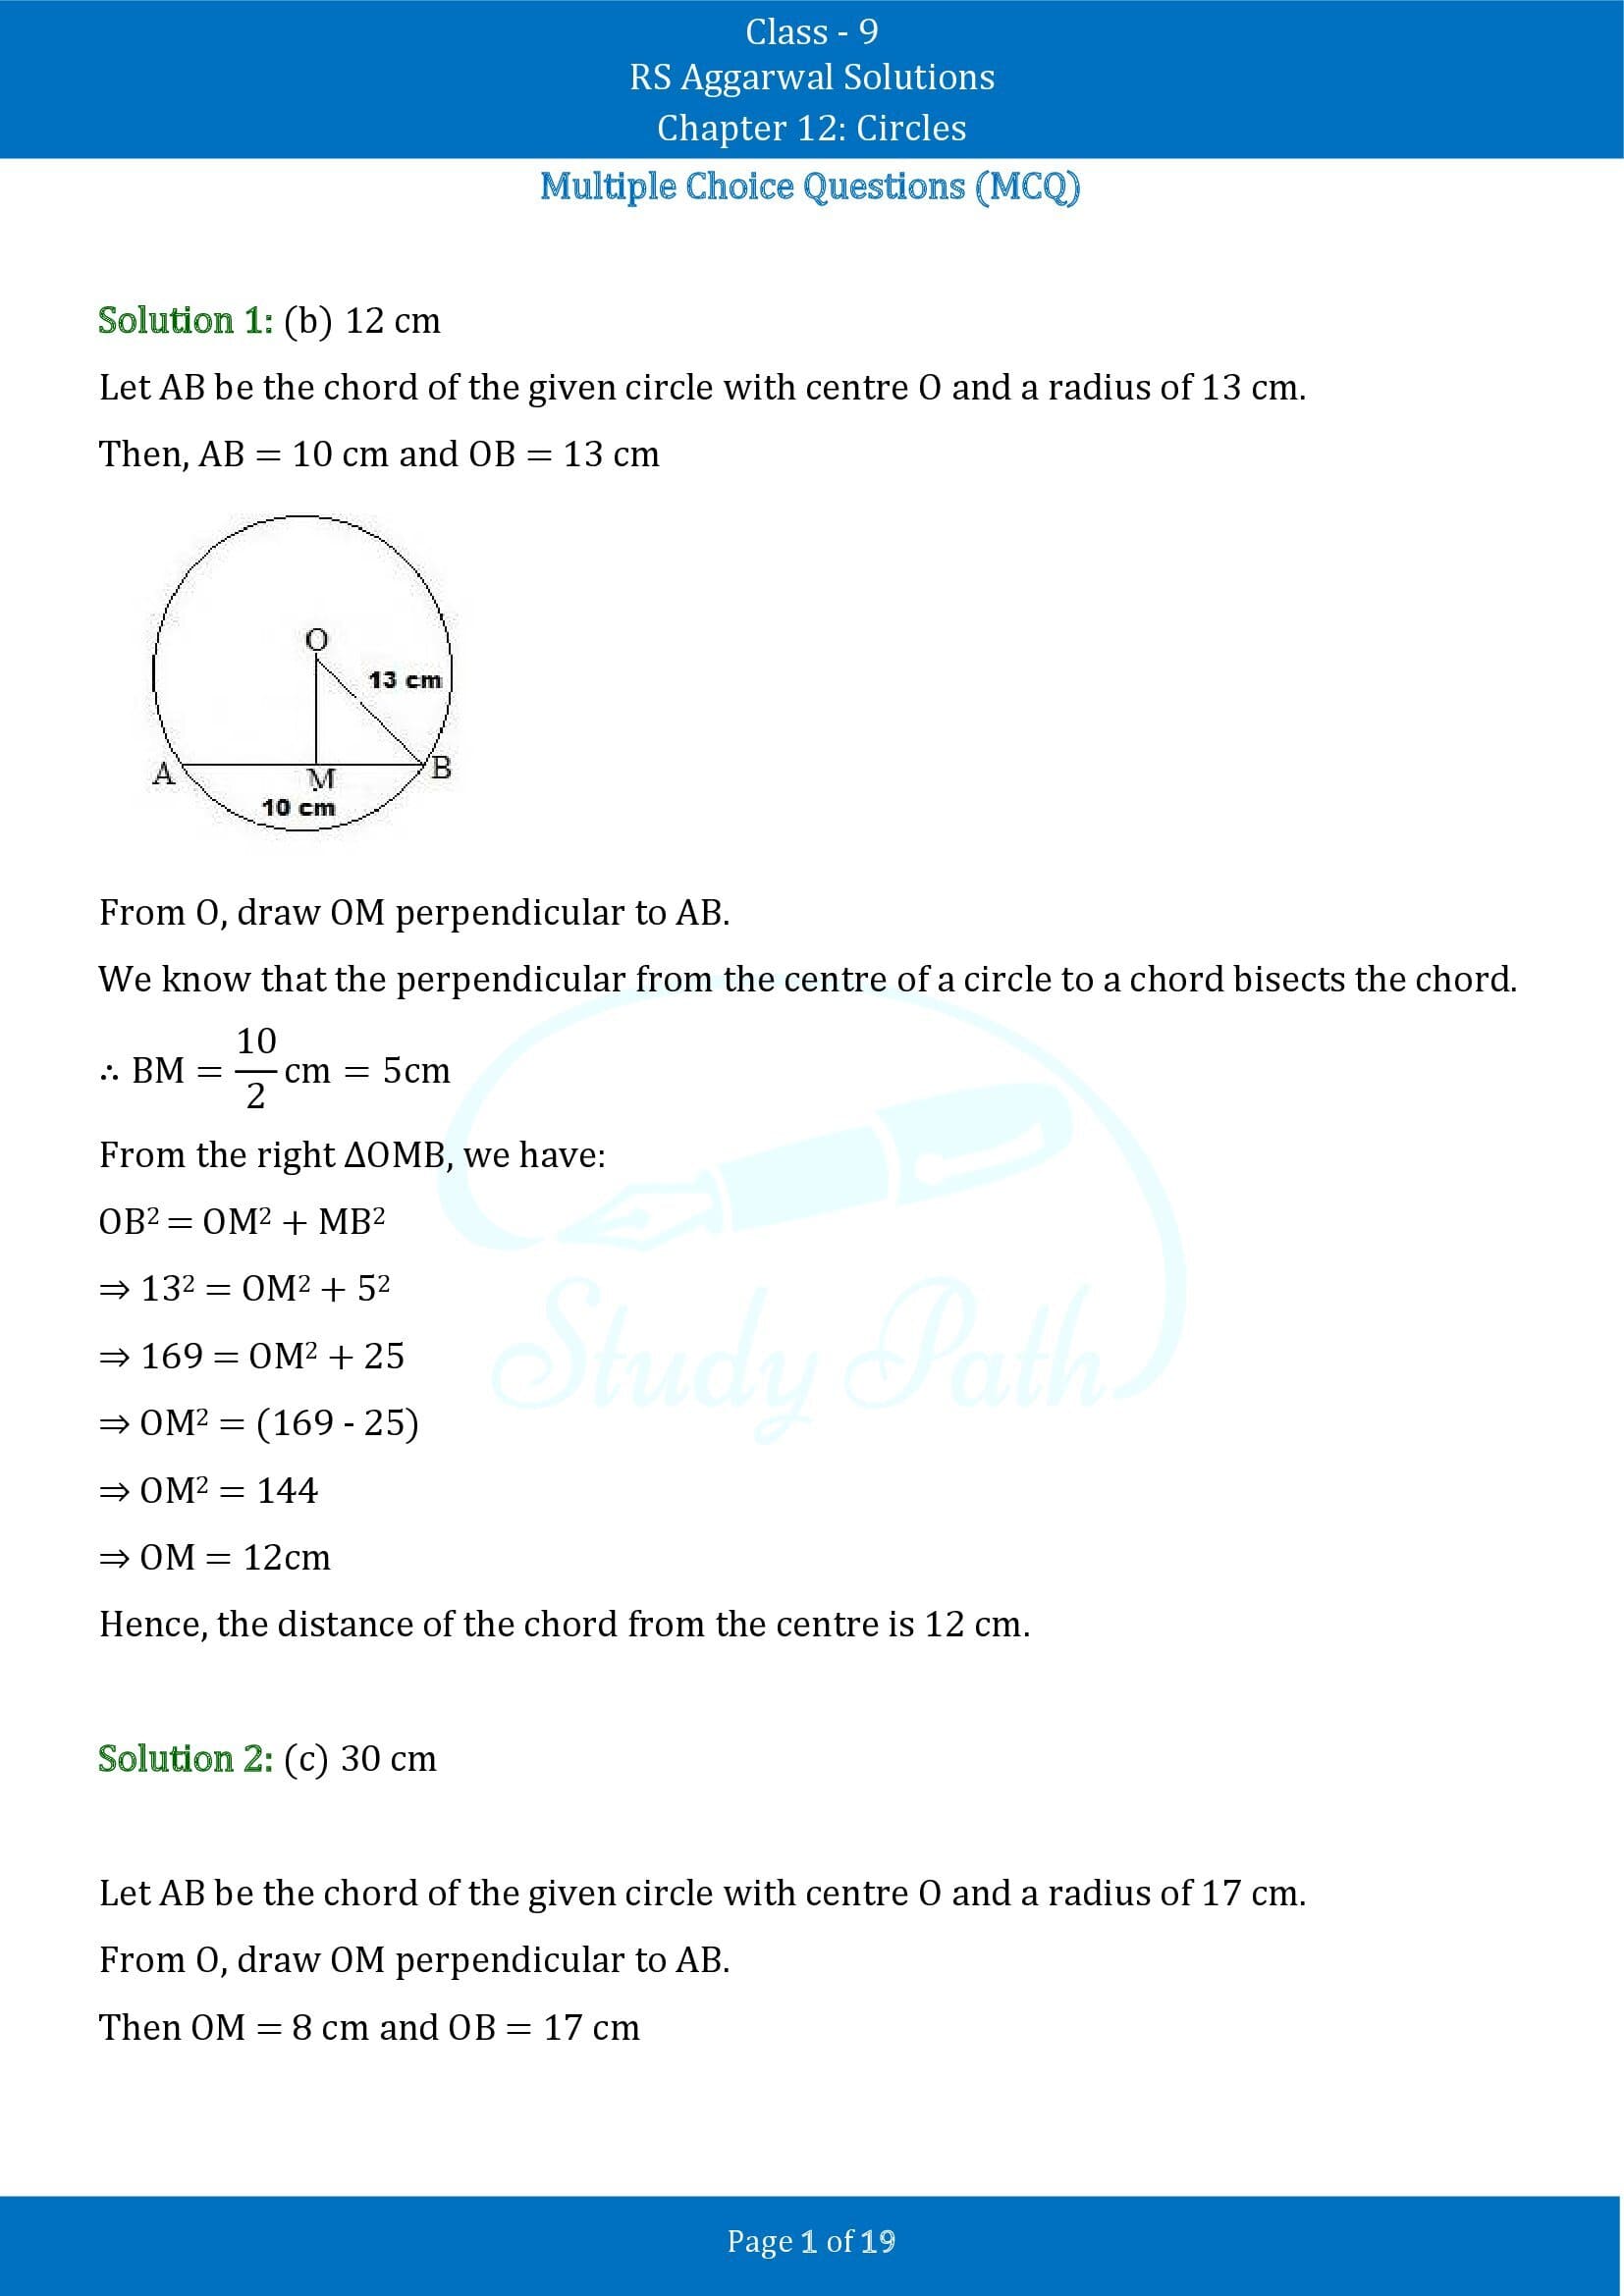 RS Aggarwal Solutions Class 9 Chapter 12 Circles Multiple Choice Questions MCQs 00001